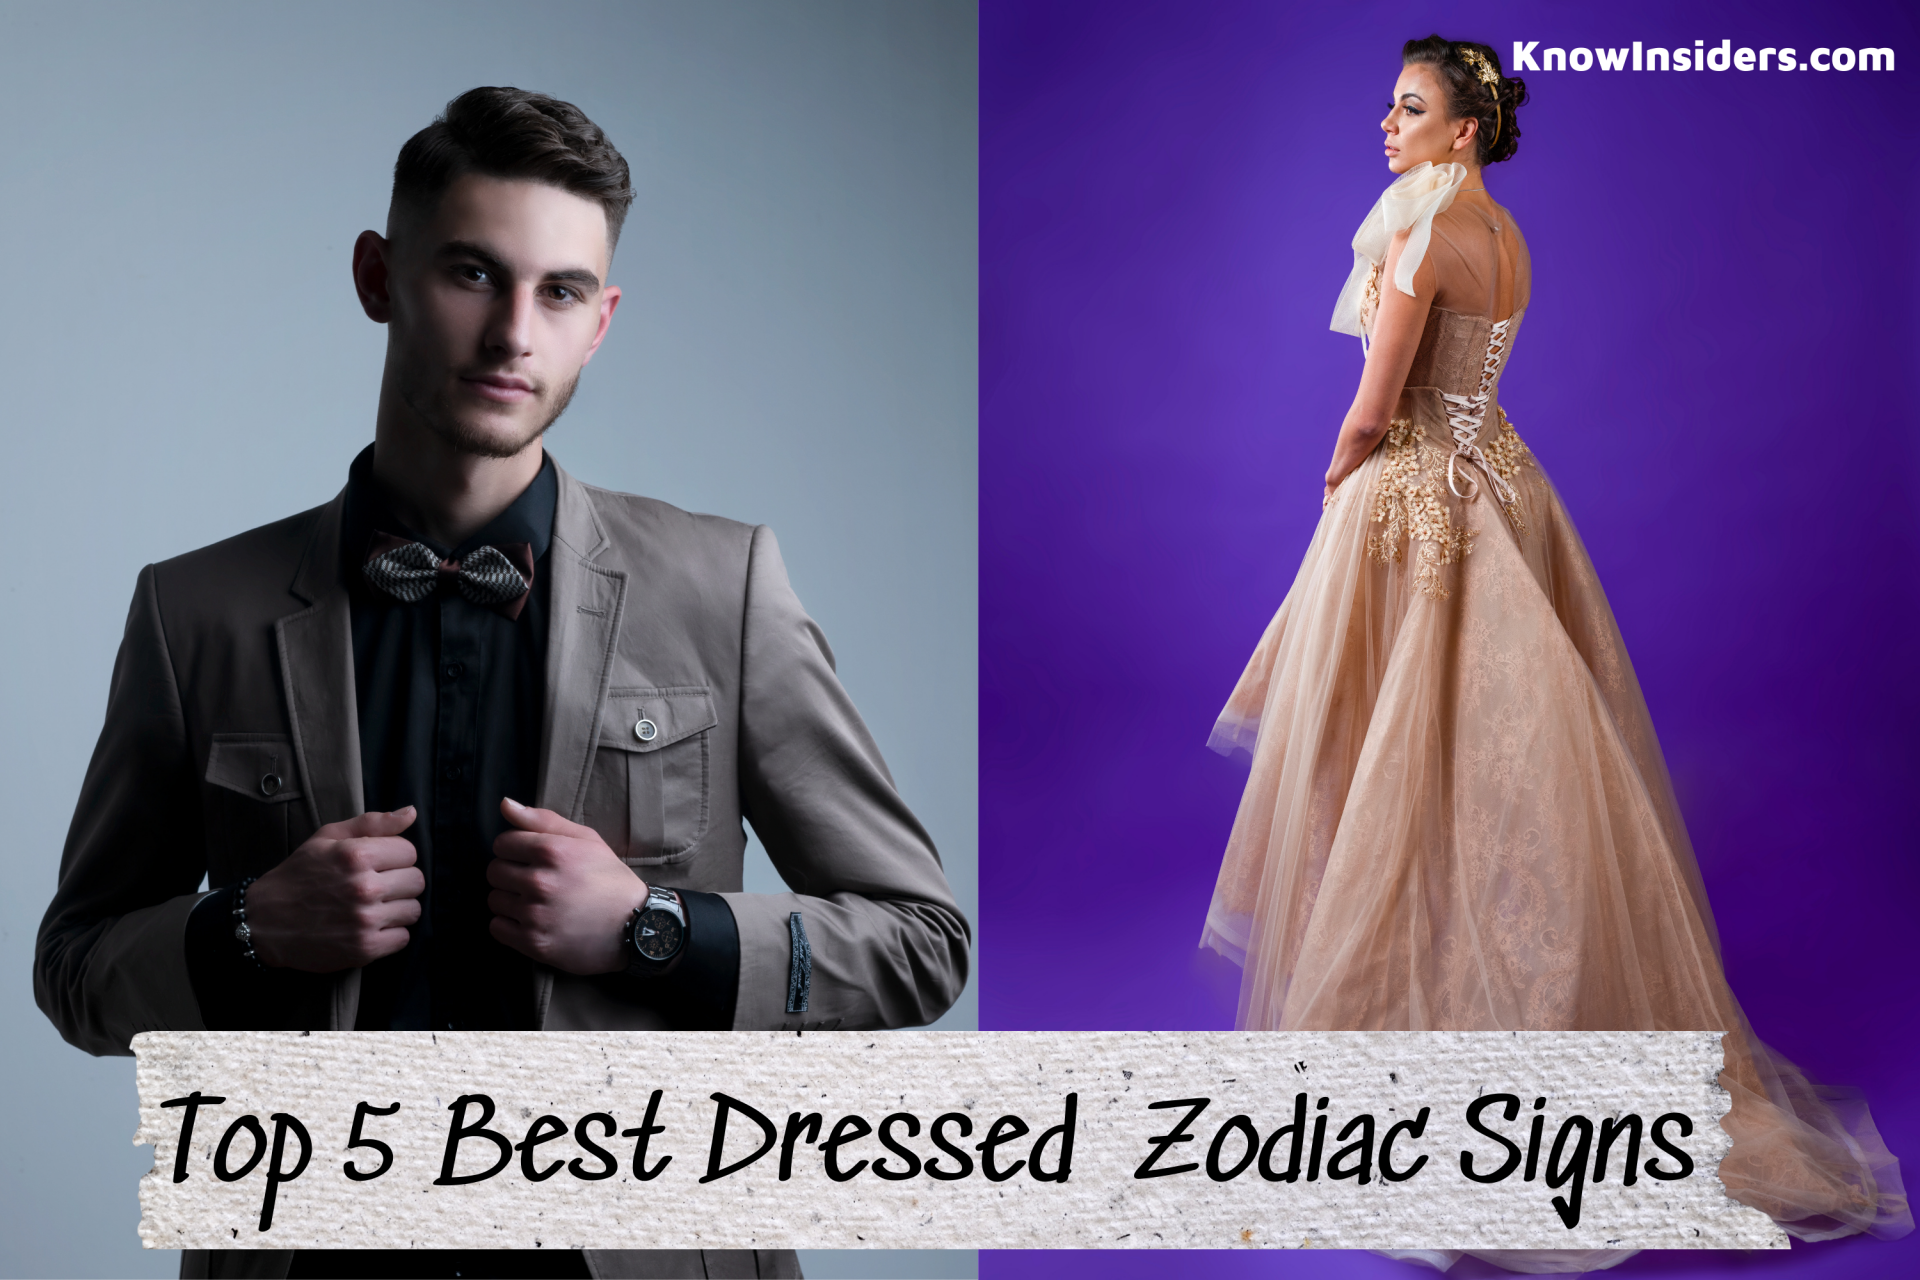 Top 5 Best Dressed Zodiac Signs - According to Astrology